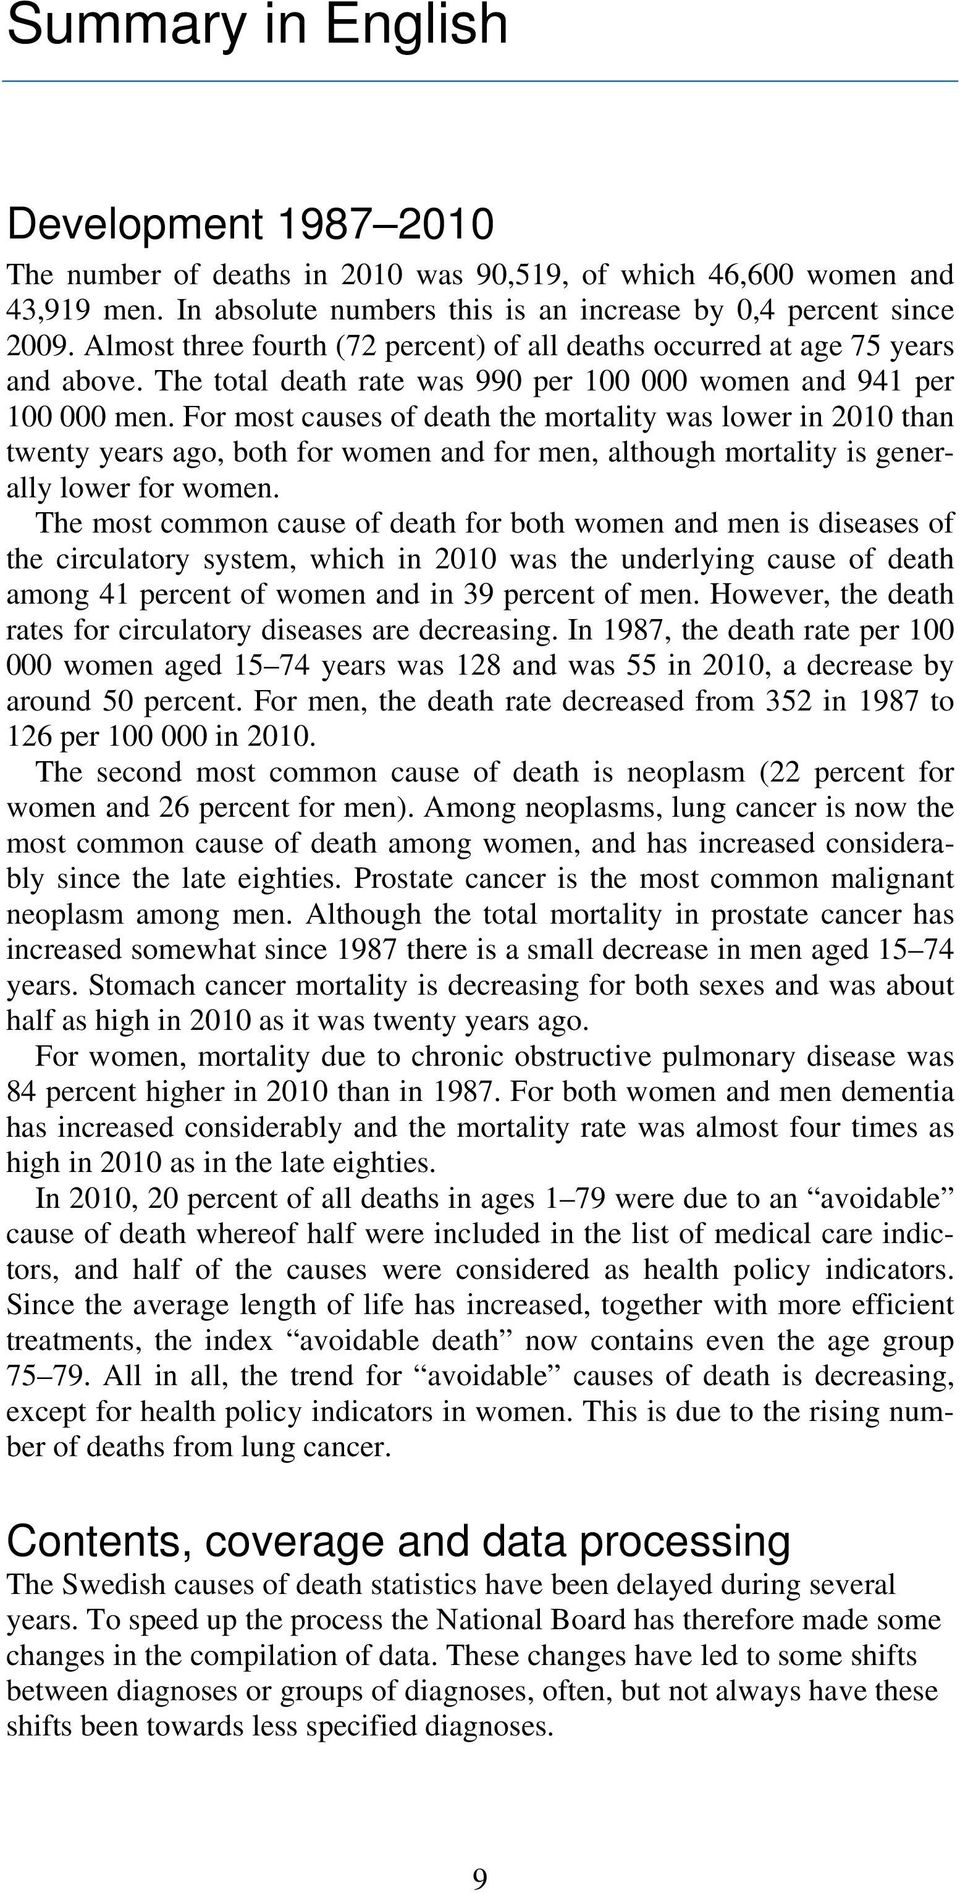 For most causes of death the mortality was lower in 2010 than twenty years ago, both for women and for men, although mortality is generally lower for women.